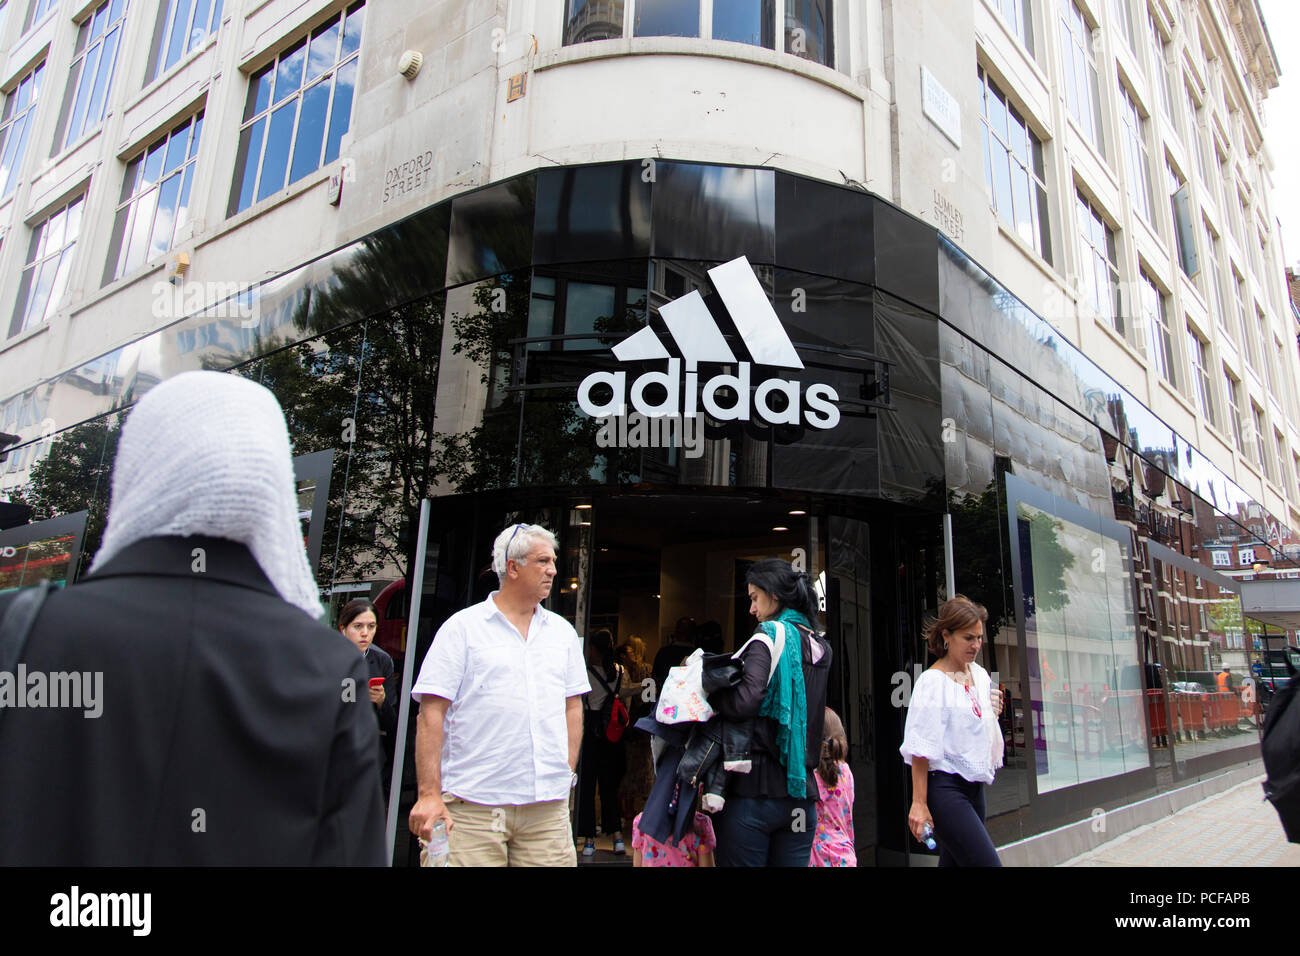 Adidas Store London High Resolution Stock Photography and Images - Alamy